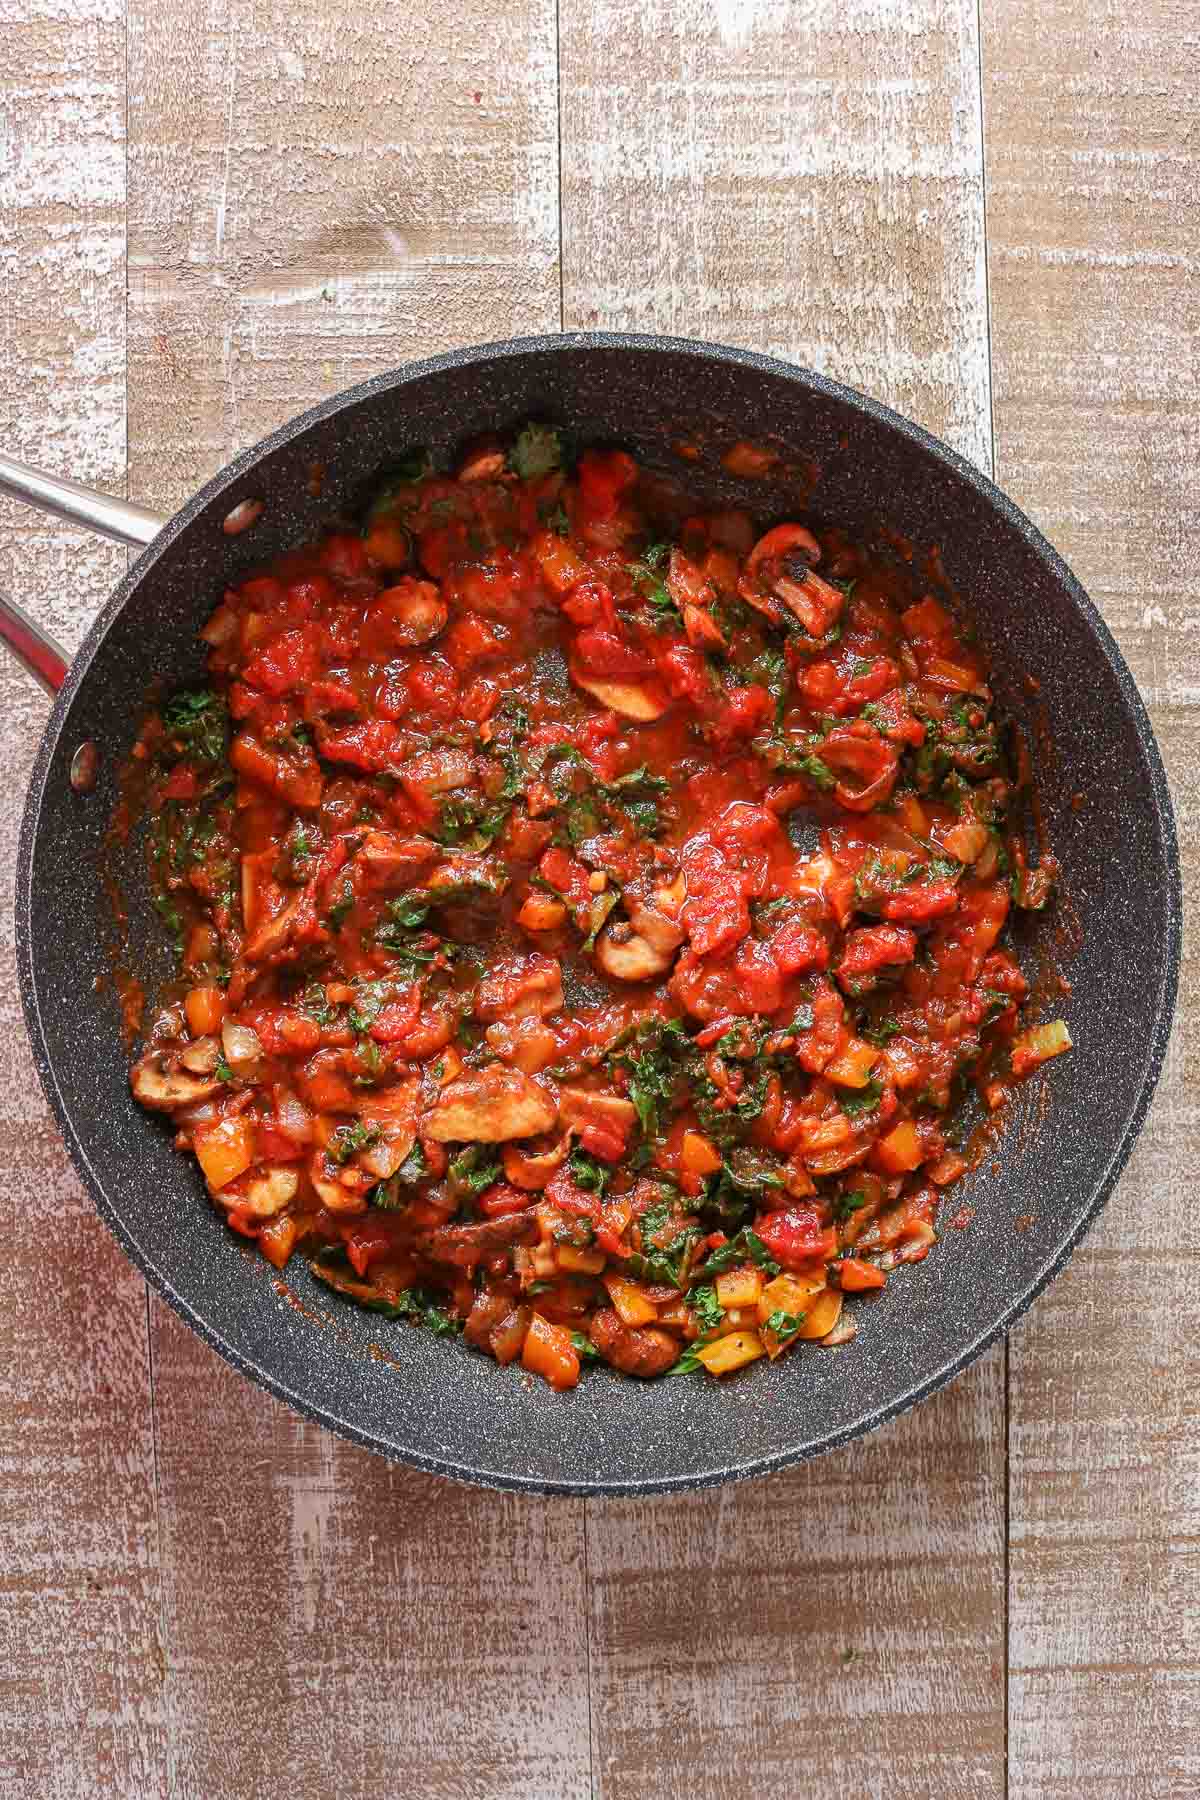 Vegetables and pasta sauce in a frying pan.